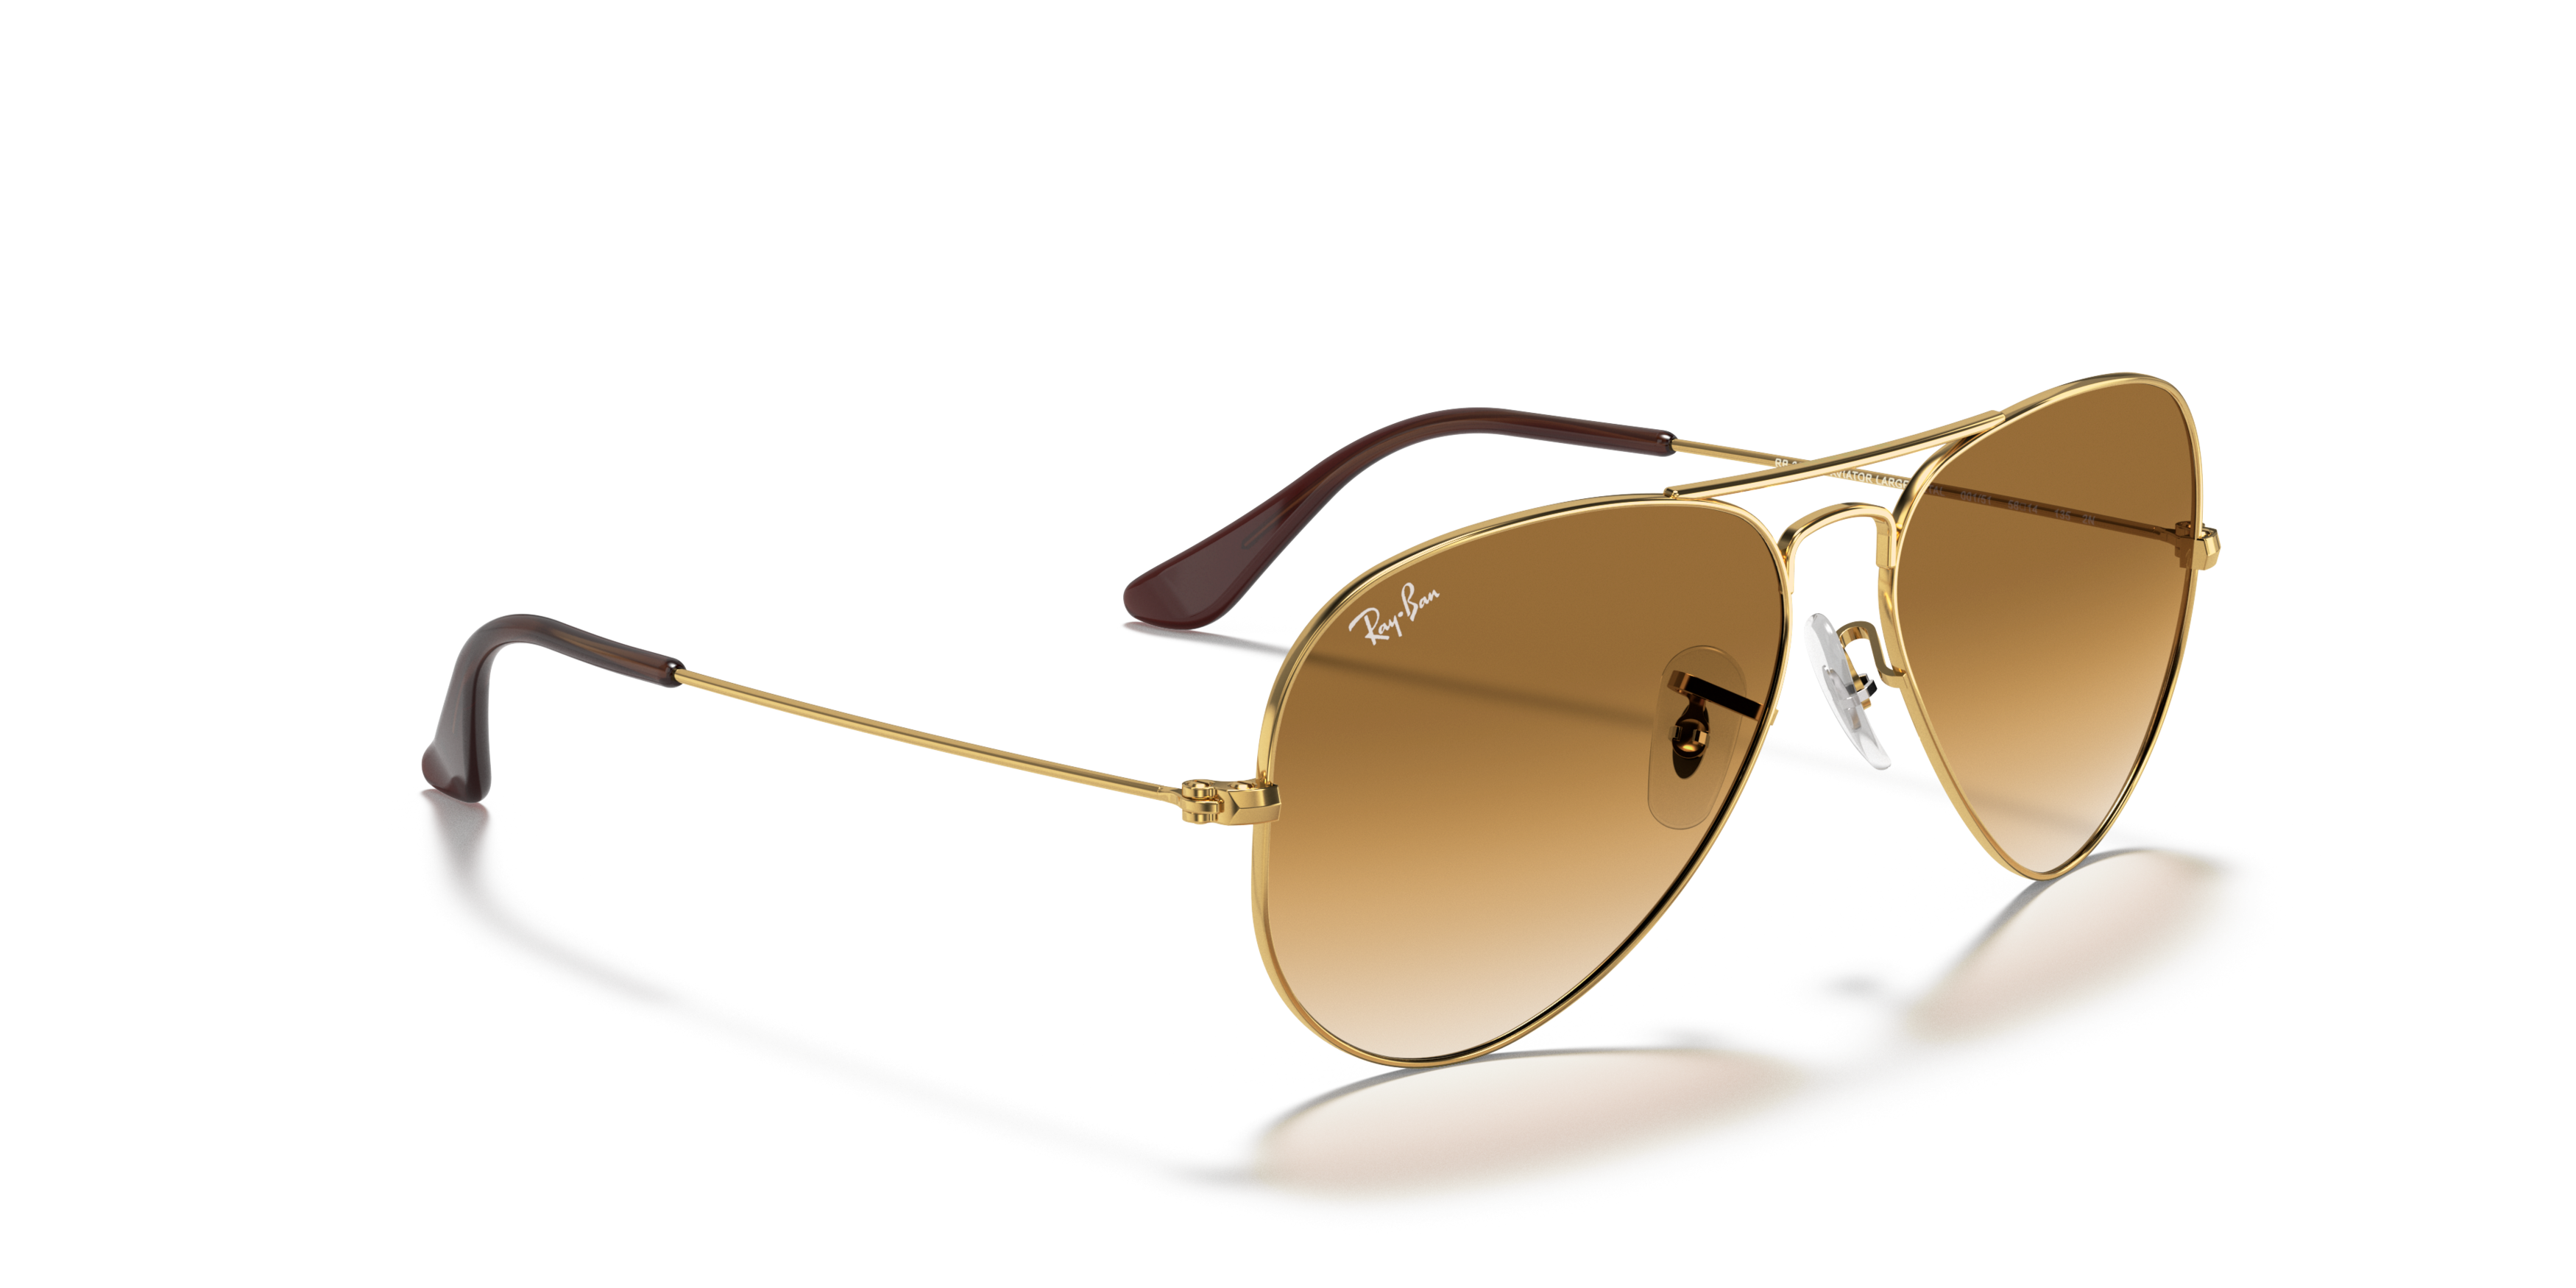 [products.image.angle_right01] Ray-Ban Aviator RB3025 001/51